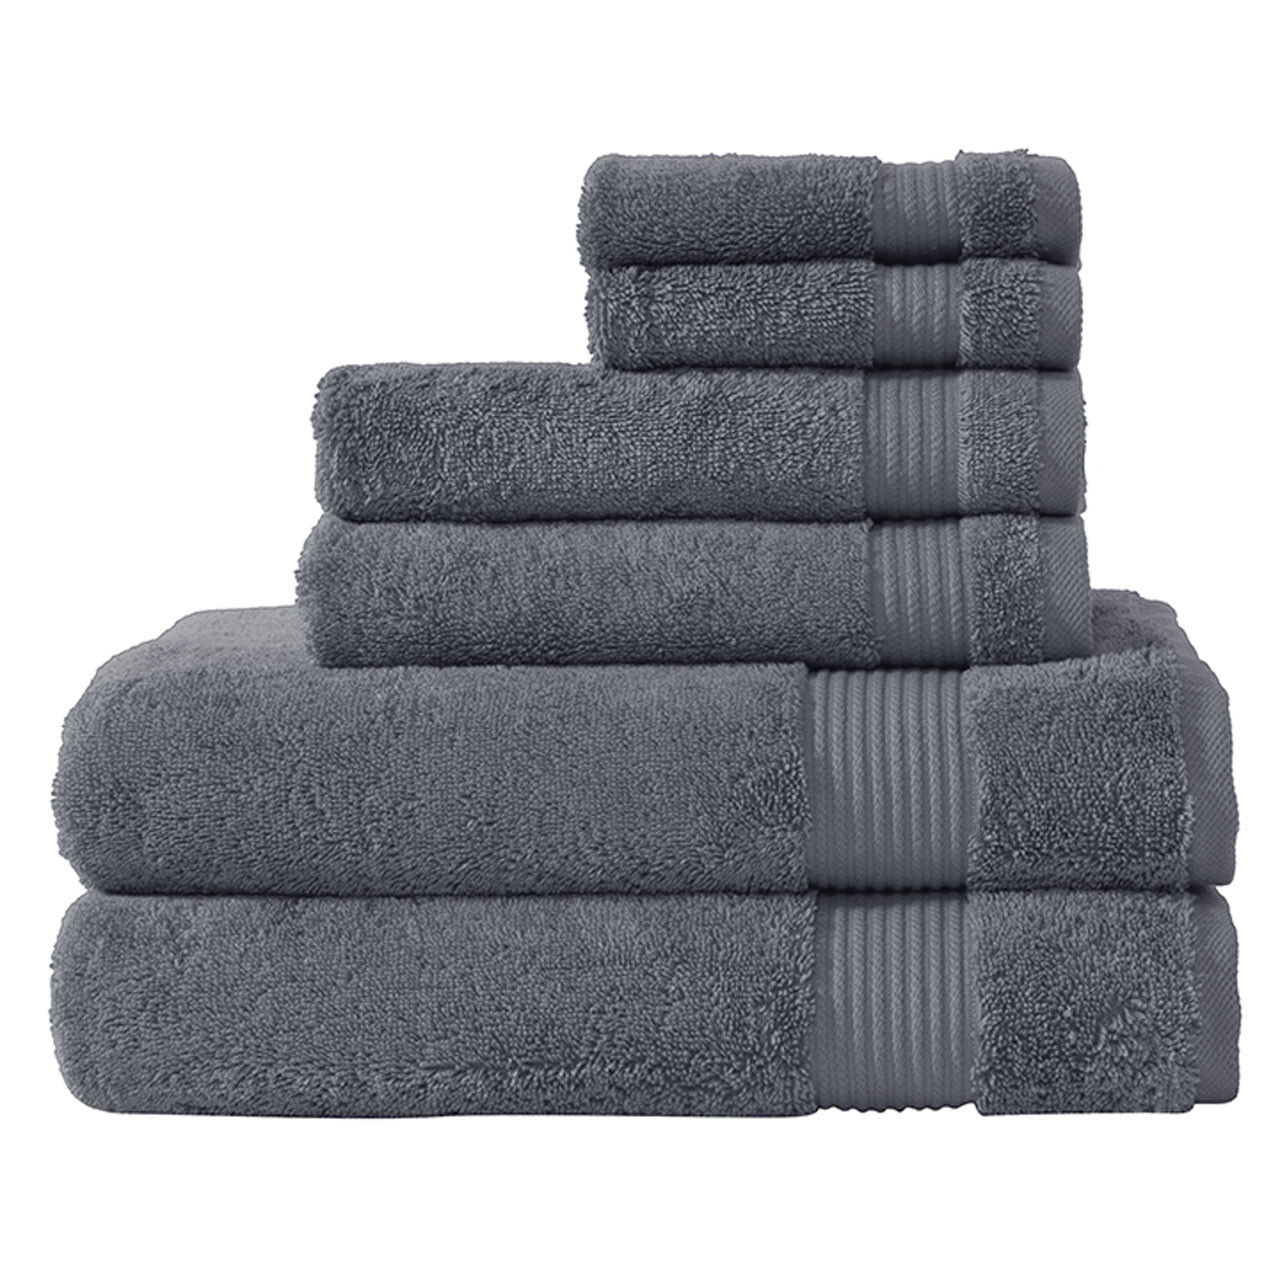 From where are the gray towels of the Amadeus Turkish Gray Towel Collection shipped?